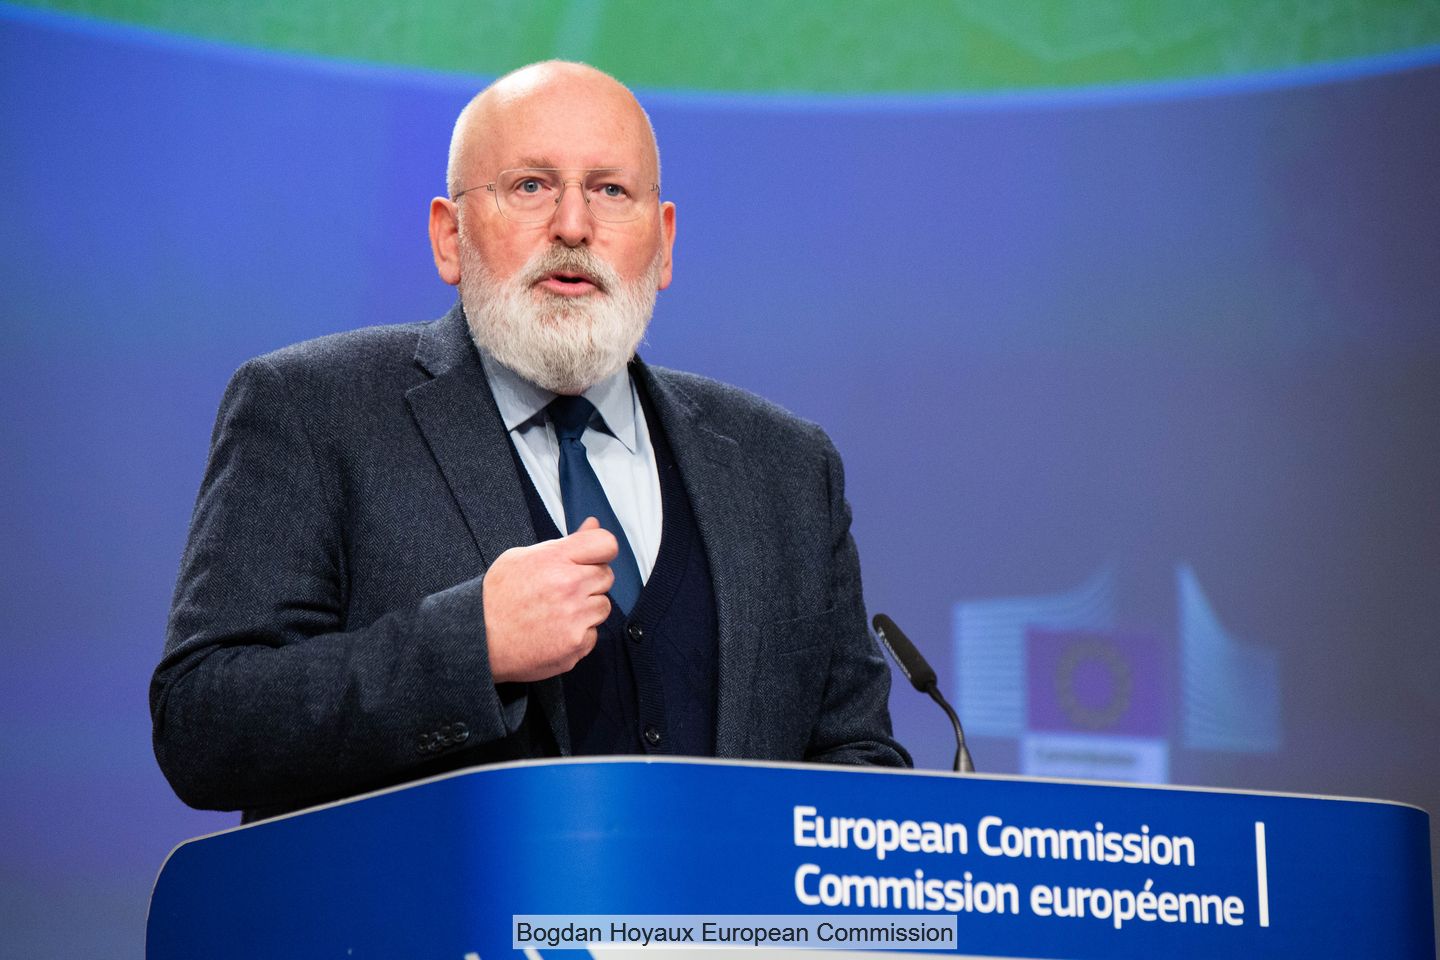 Frans Timmermans, Commission Vice-President responsible for sustainable development, at the press conference on 30 November marking the publication of the new circular economy package.